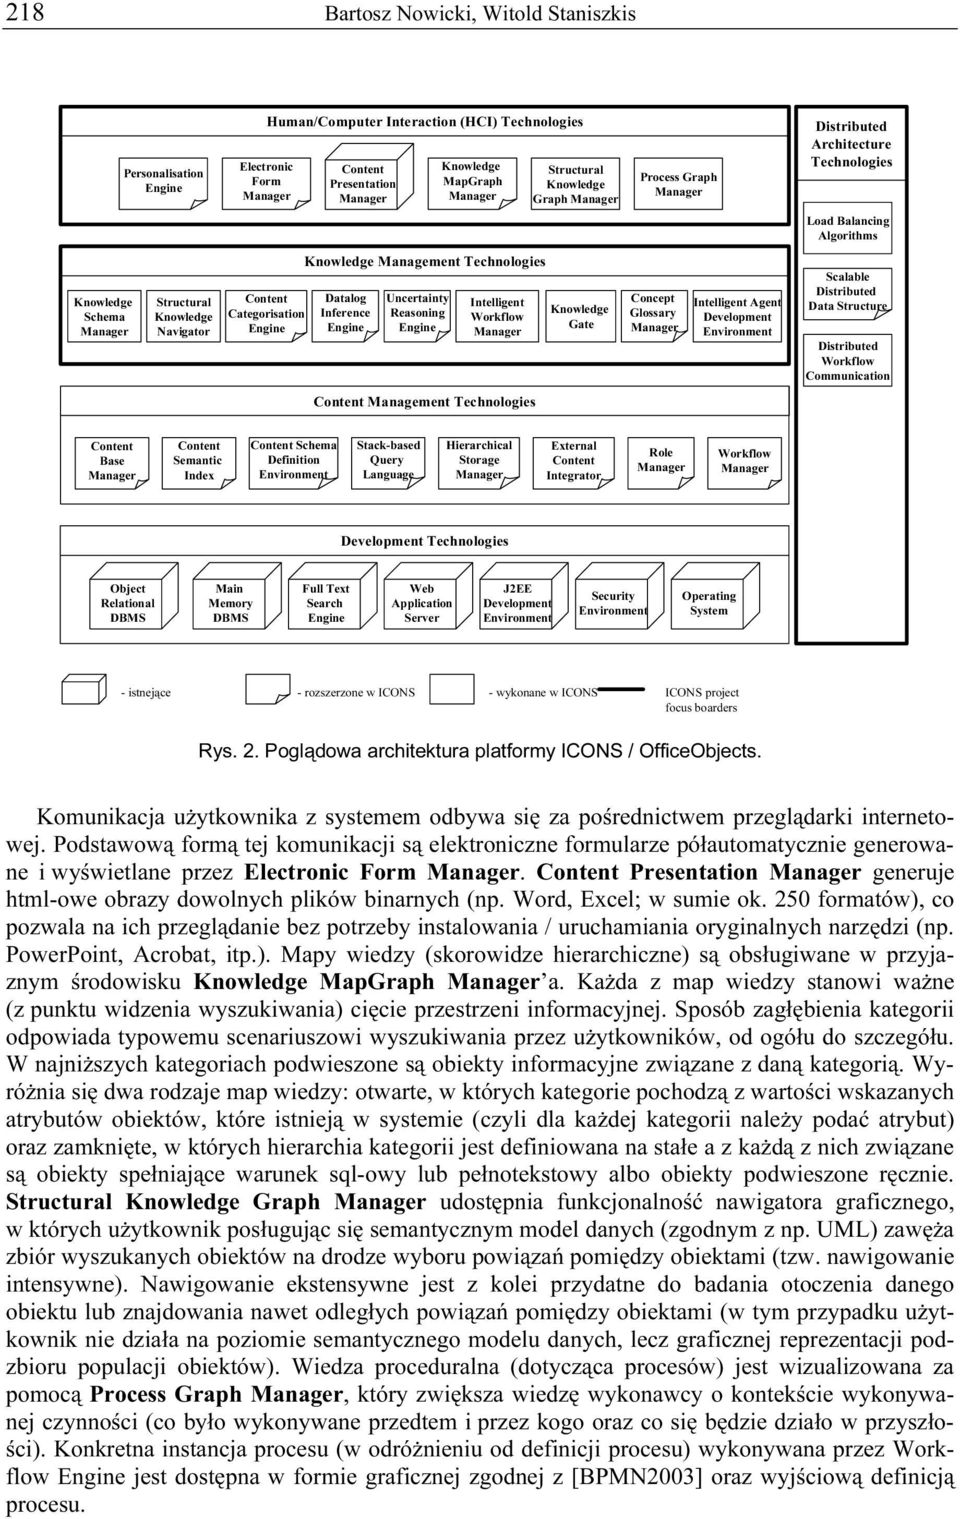 Structural Knowledge Graph Knowledge Gate Process Graph Concept Glossary Intelligent Agent Development Environment Distributed Architecture Technologies Load Balancing Algorithms Scalable Distributed